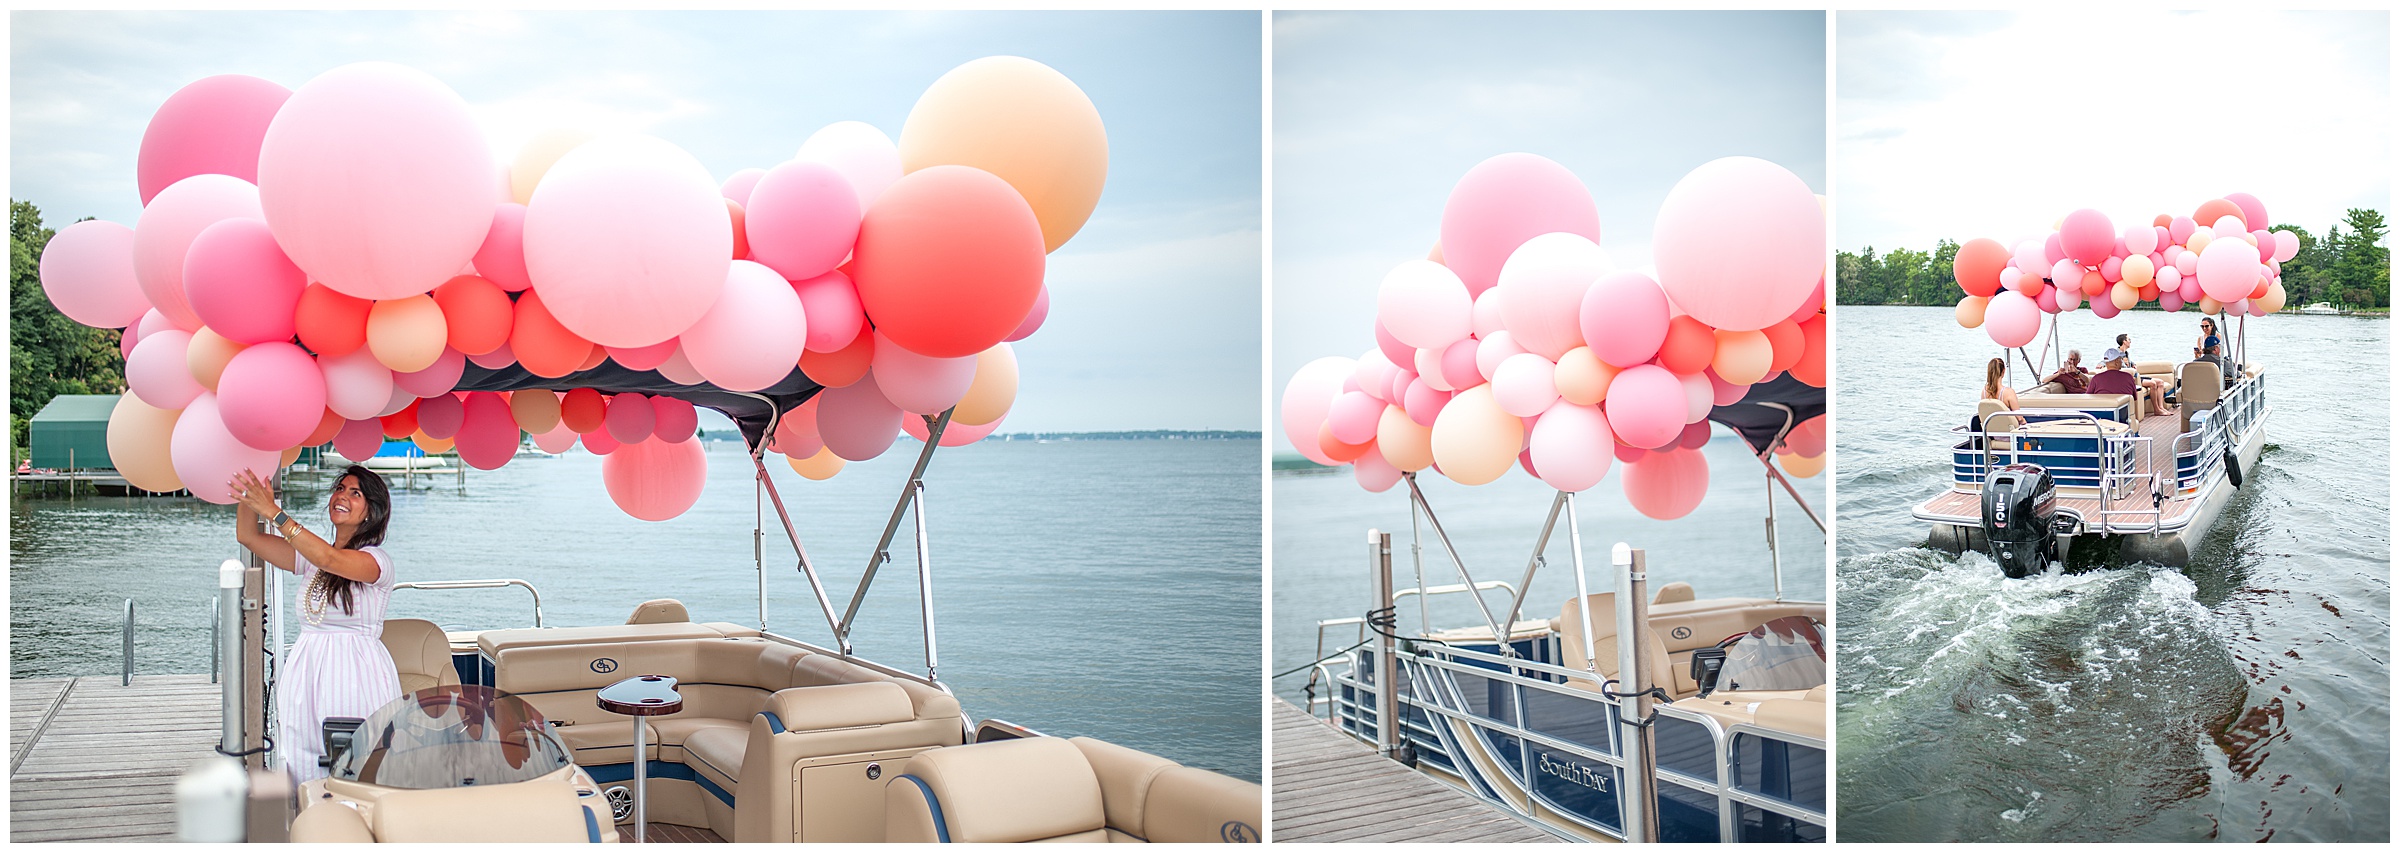 The Benefits of Hiring a Wedding Planner, Destination Wedding Planner, Minneapolis Wedding Planner, Balloon Decorations, Balloon Boat, Birthday Party Decor, Event Planner